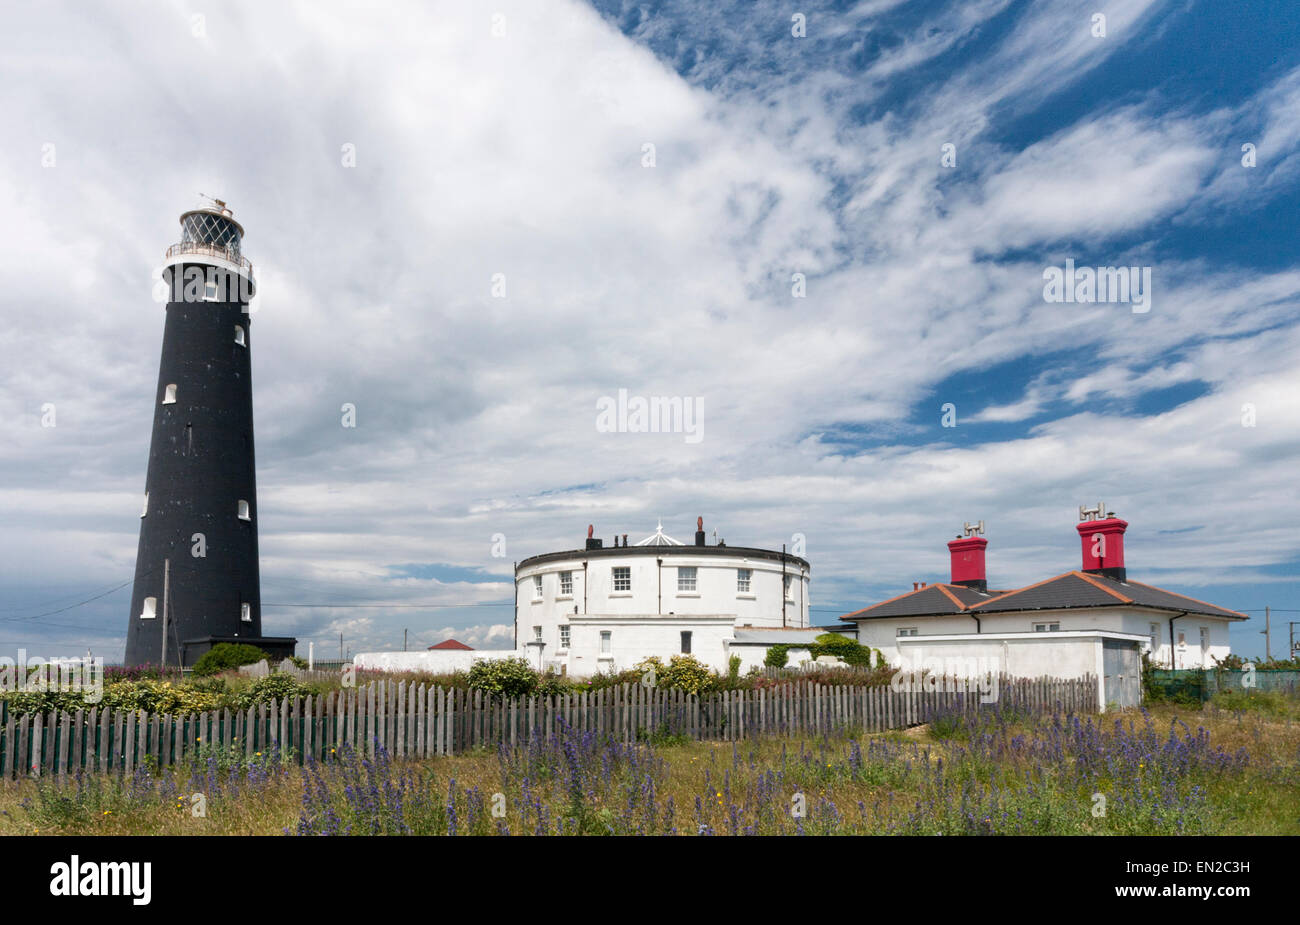 Dungeness Old Lighthouse and Cottages, Dungeness, Kent, Angleterre, Royaume-Uni Banque D'Images